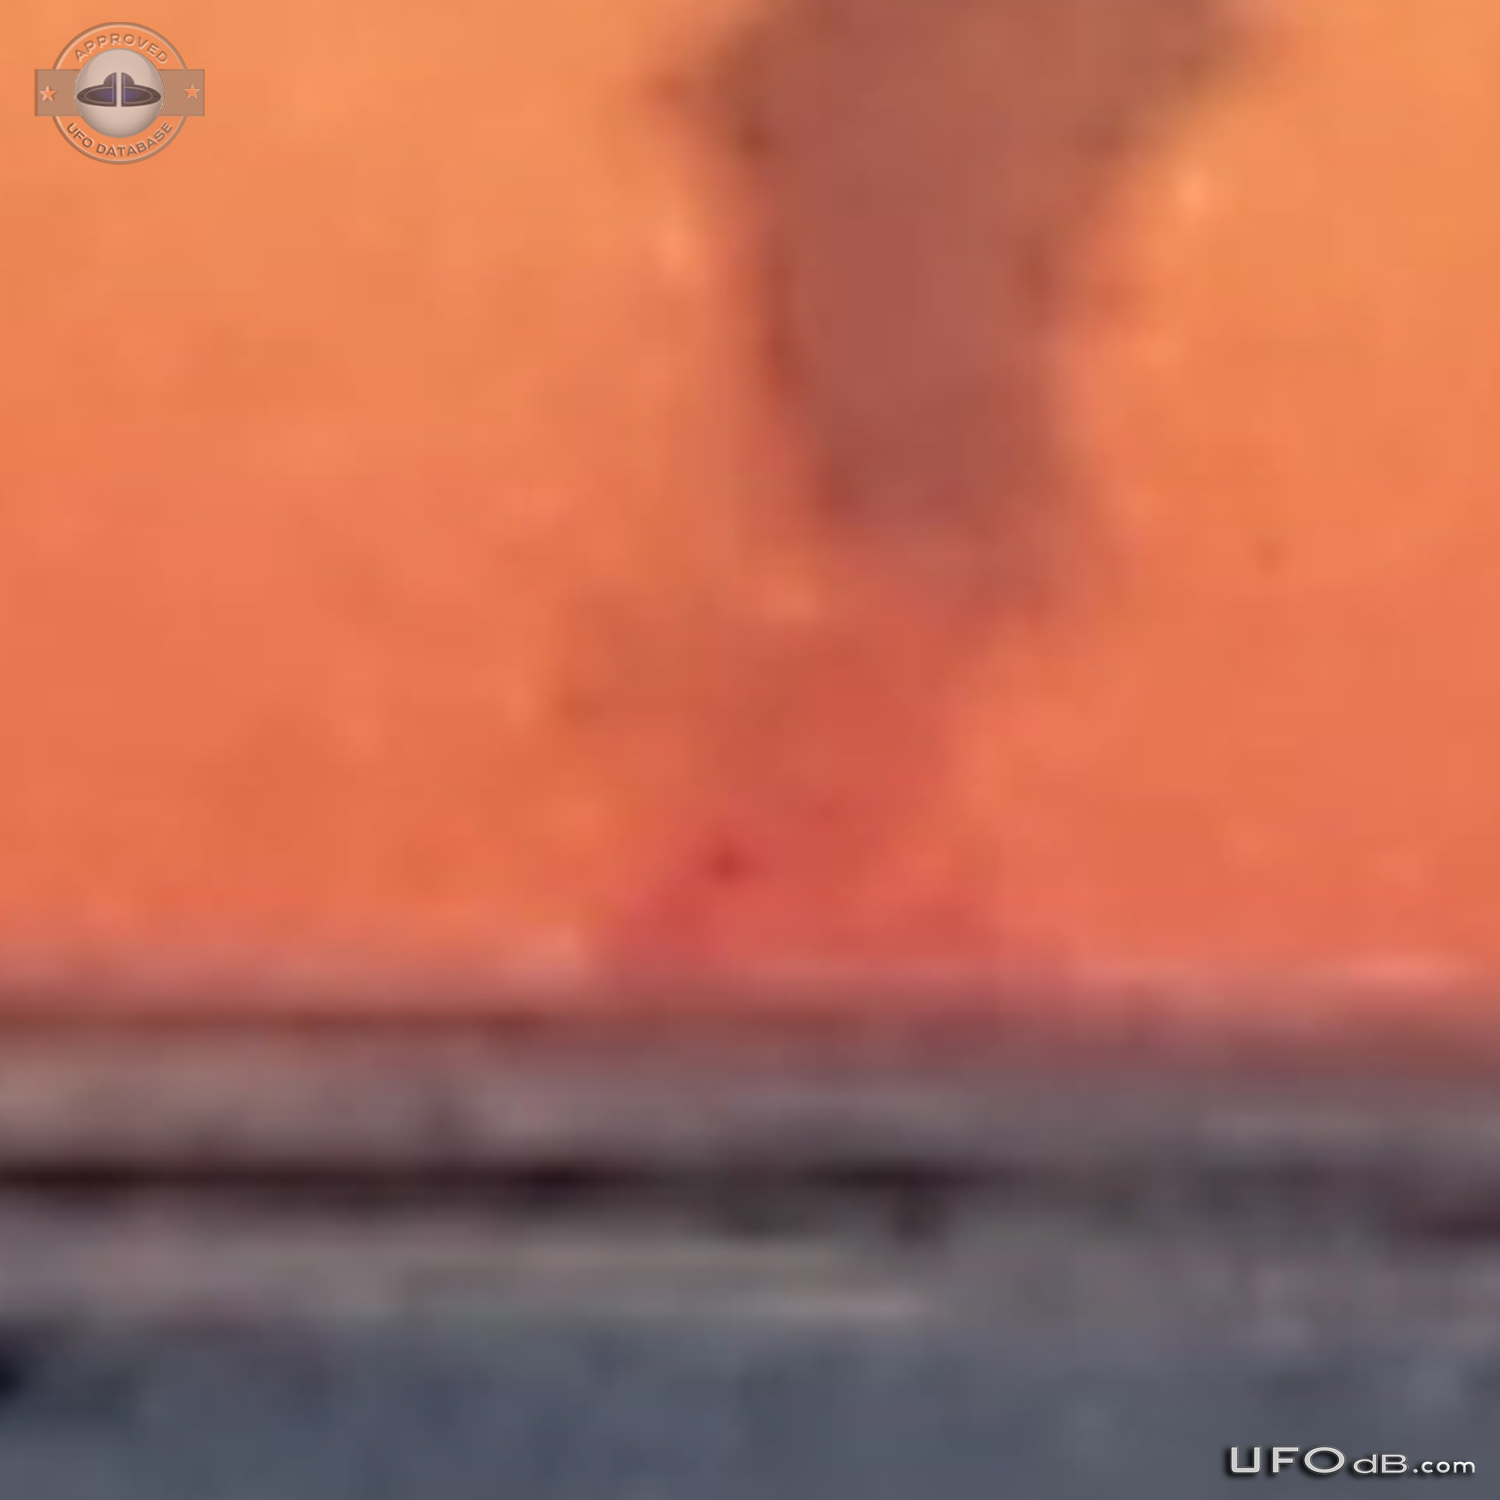 UFO leave the water straight up out in 5 seconds Alakanuk, Alaska USA UFO Picture #621-4